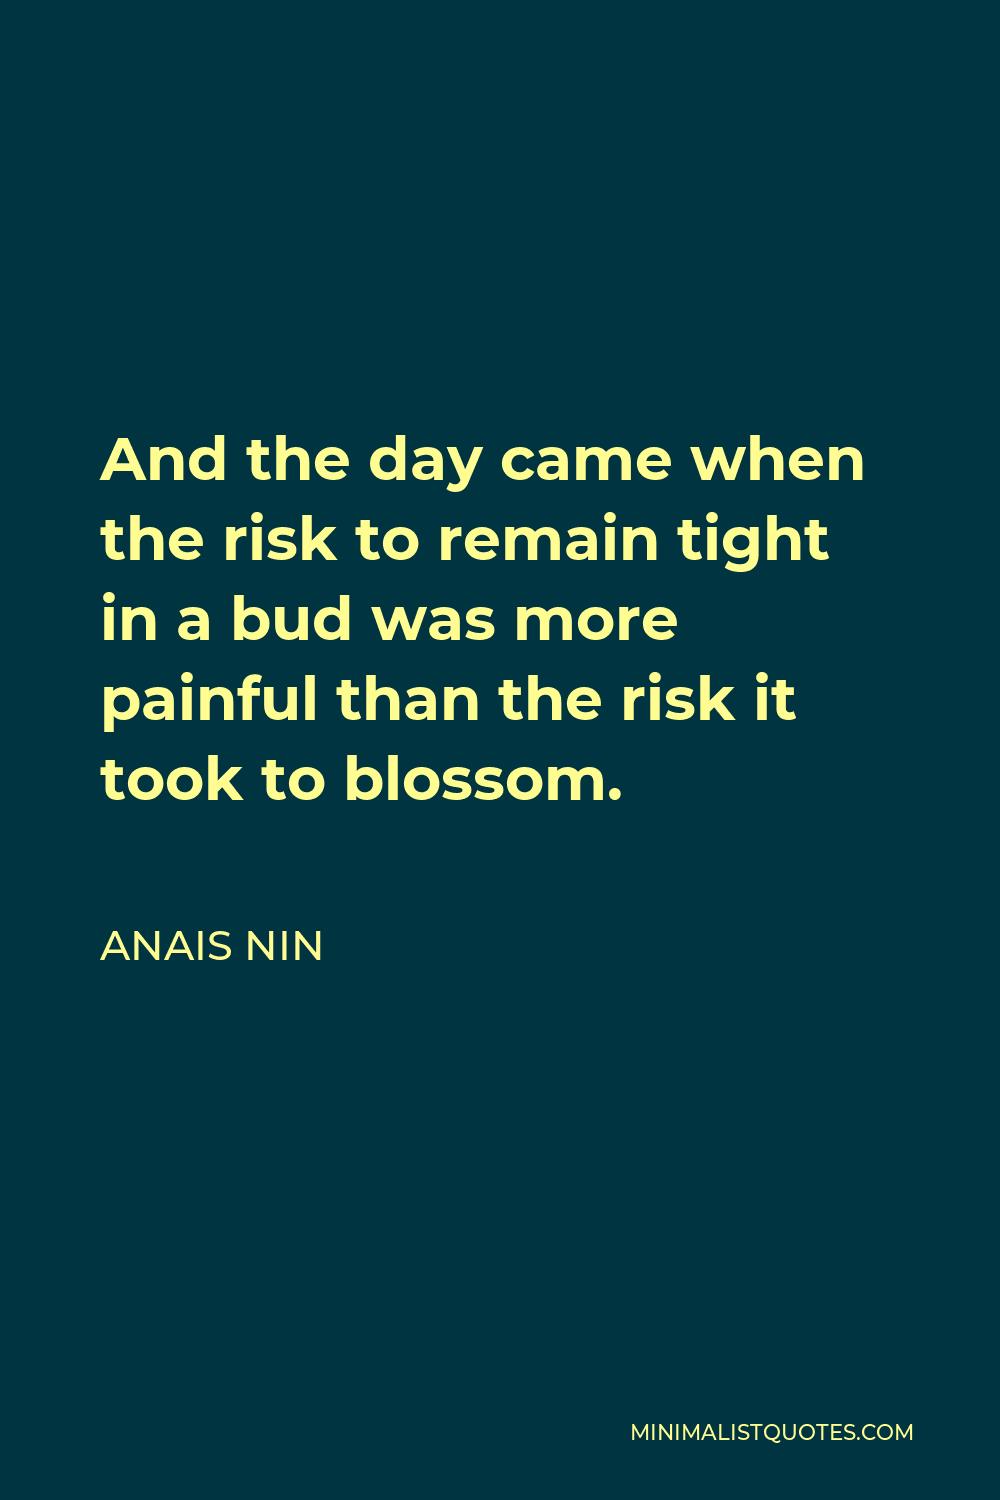 Anais Nin Quote - And the day came when the risk to remain tight in a bud was more painful than the risk it took to blossom.